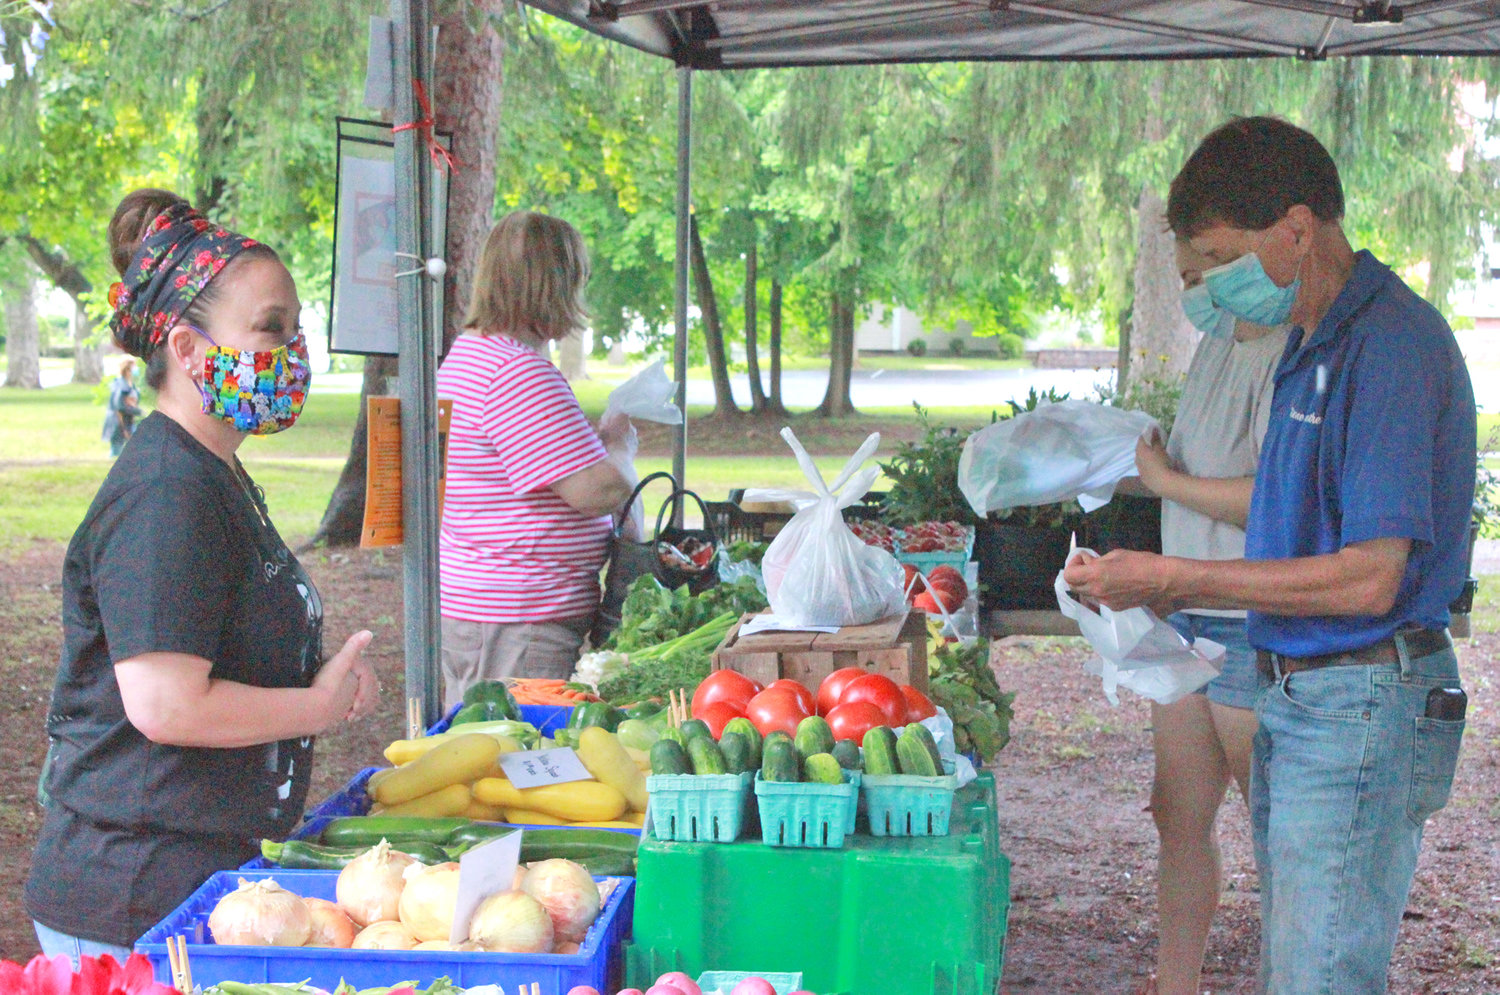 Stone Brothers Farm and Greenhouse in Canastota sell their produce at the Cottage Lawn Farmers Market. The Madison County Historical Society’s bi-weekly farmers market will take place Tuesdays, Sept. 6 and 20, from 2 to 6 p.m.